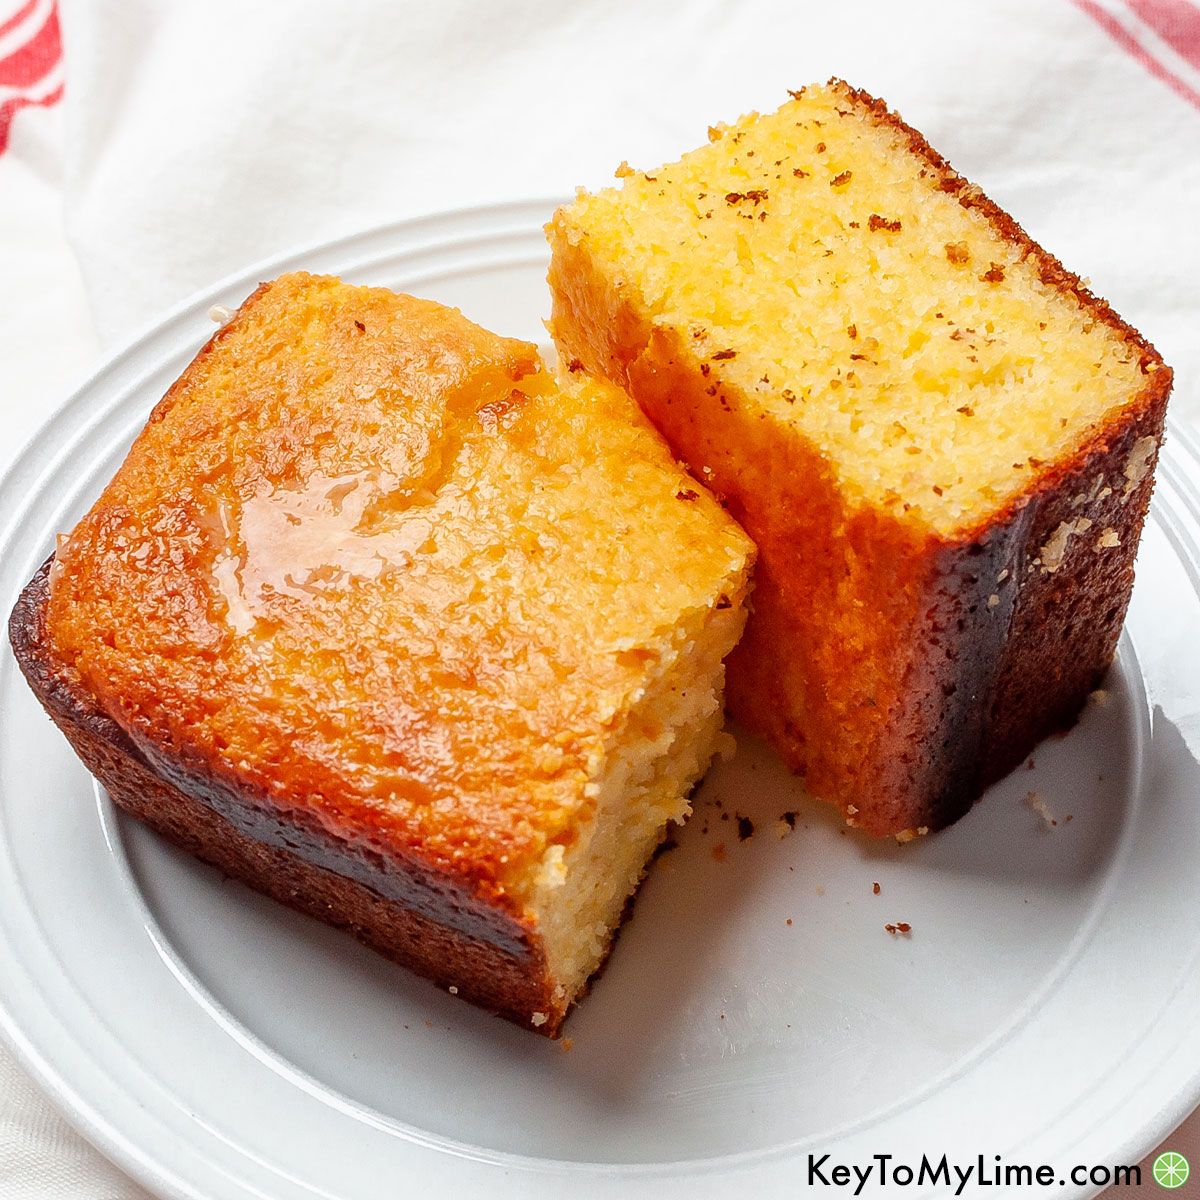 How to Make Corn Bread Moist and Fluffy Every Time in 4 Simple Steps